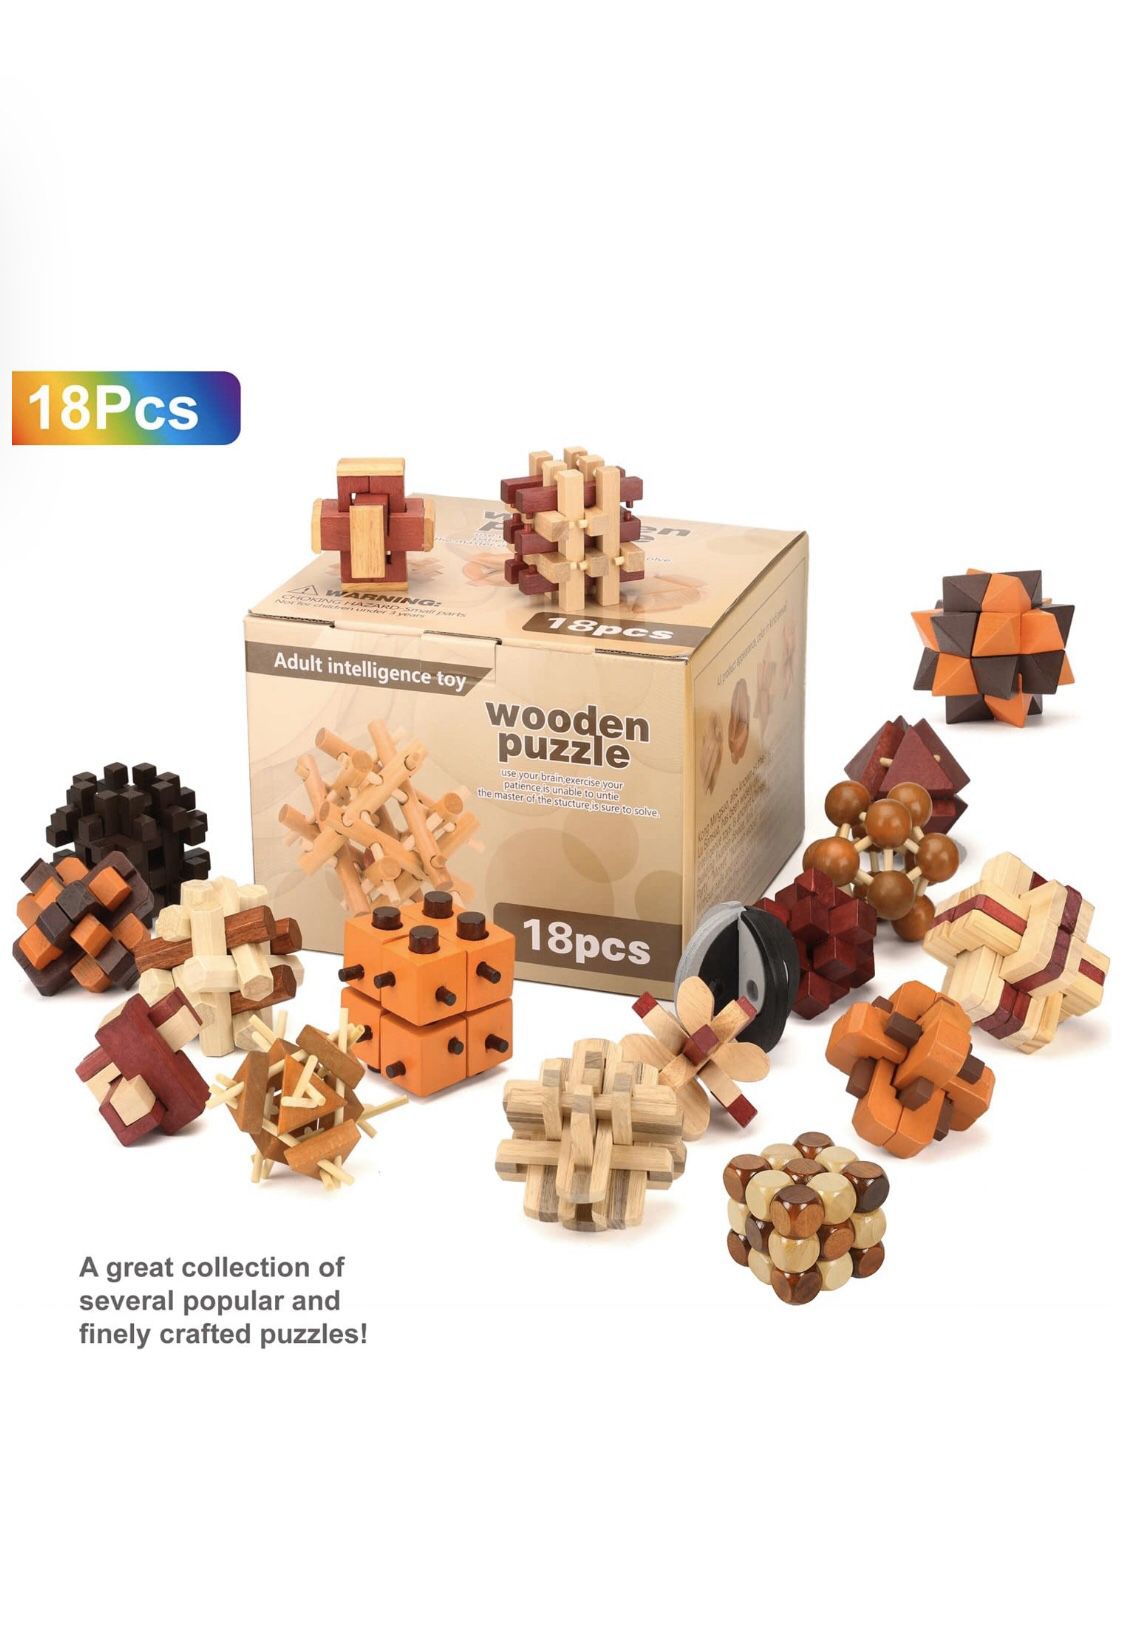 3D Wooden Brain Teaser Puzzle Diamond Cube Interlocking Jigsaw Puzzles for Teens and Adults #2 - Challenge Your Logical Thinking - Ideal Gift